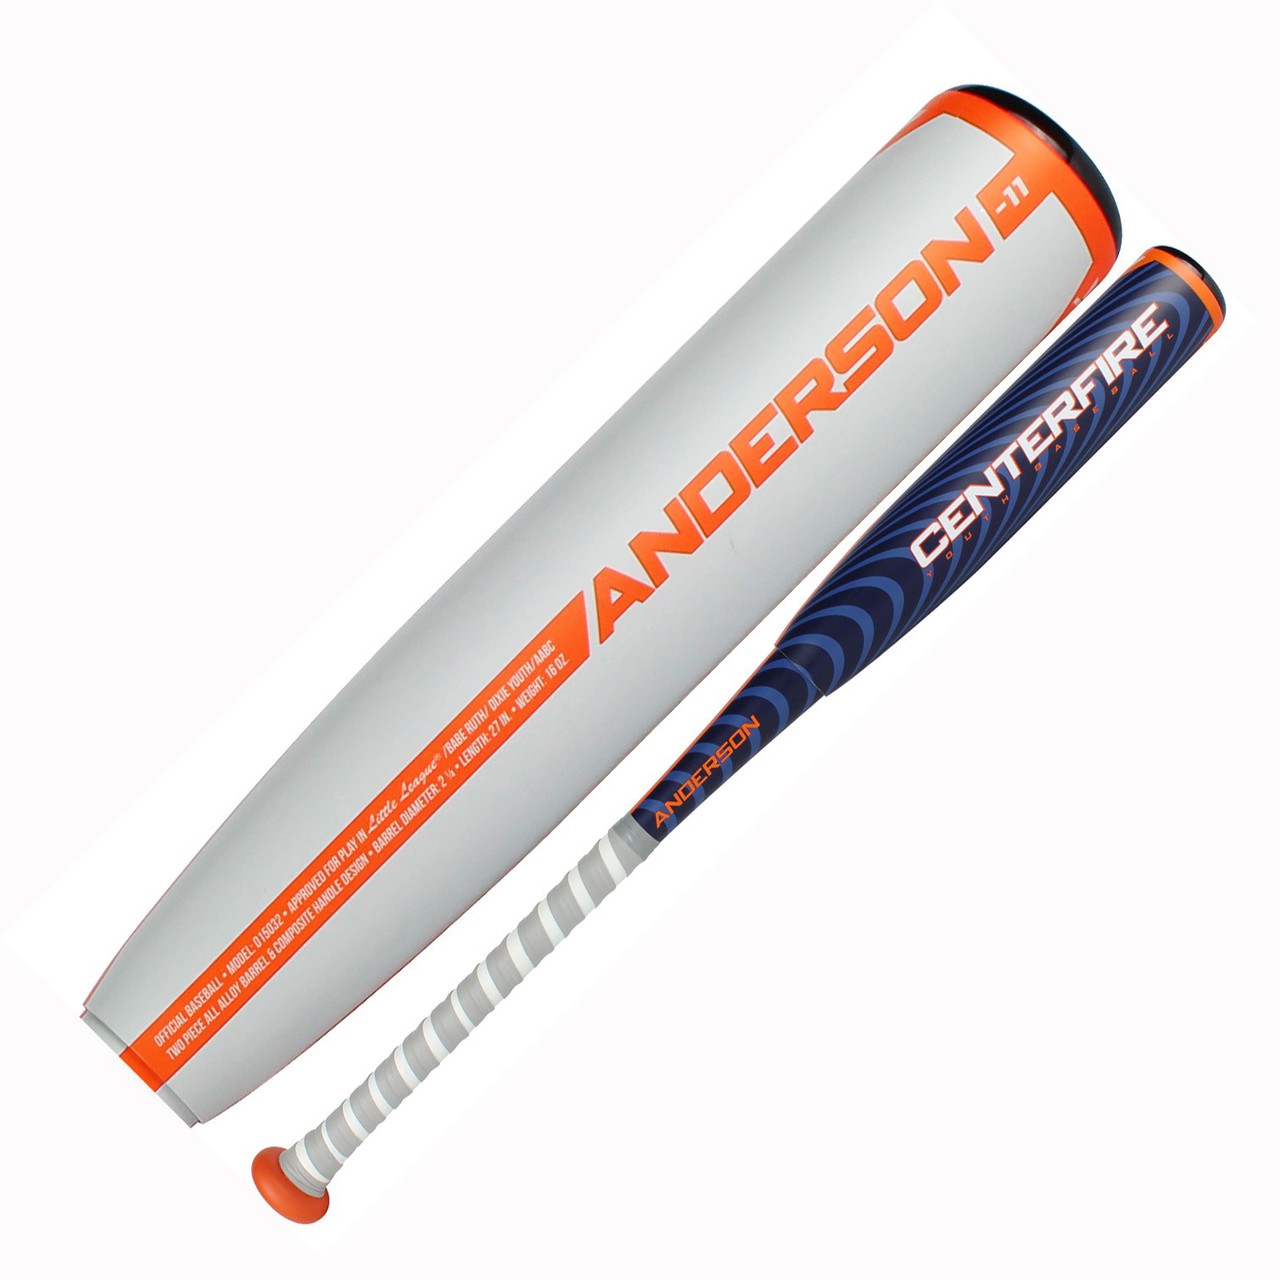 The Anderson Centerfire baseball bat is our latest addition to our youth baseball category. The two piece design offers an ultra-balanced swing weight for better bat speed for players looking to get through the hitting zone much faster.  The high grade alloy barrel generates massive power thru out the barrel allowing you to center each hit on a baseball, and the complex multi-layer composite handle allows for faster whip on each at bat. No hype, just performance!   2 14“ Barrel-11 Drop WeightBalanced swing weight for more speed and powerHot out of the wrapper, no “break-in” period necessaryHi grade aerospace alloy barrel for power and durabilityComplex composite handle for advanced flex and whip with each at batMeets BPF 1.15 StandardApproved By All Major Baseball Associations Including: Little League, Dixie Youth, Babe Ruth, AABC, & USSSAModel #: 015032Manufacture Warranty: 1 year against manufacture defects